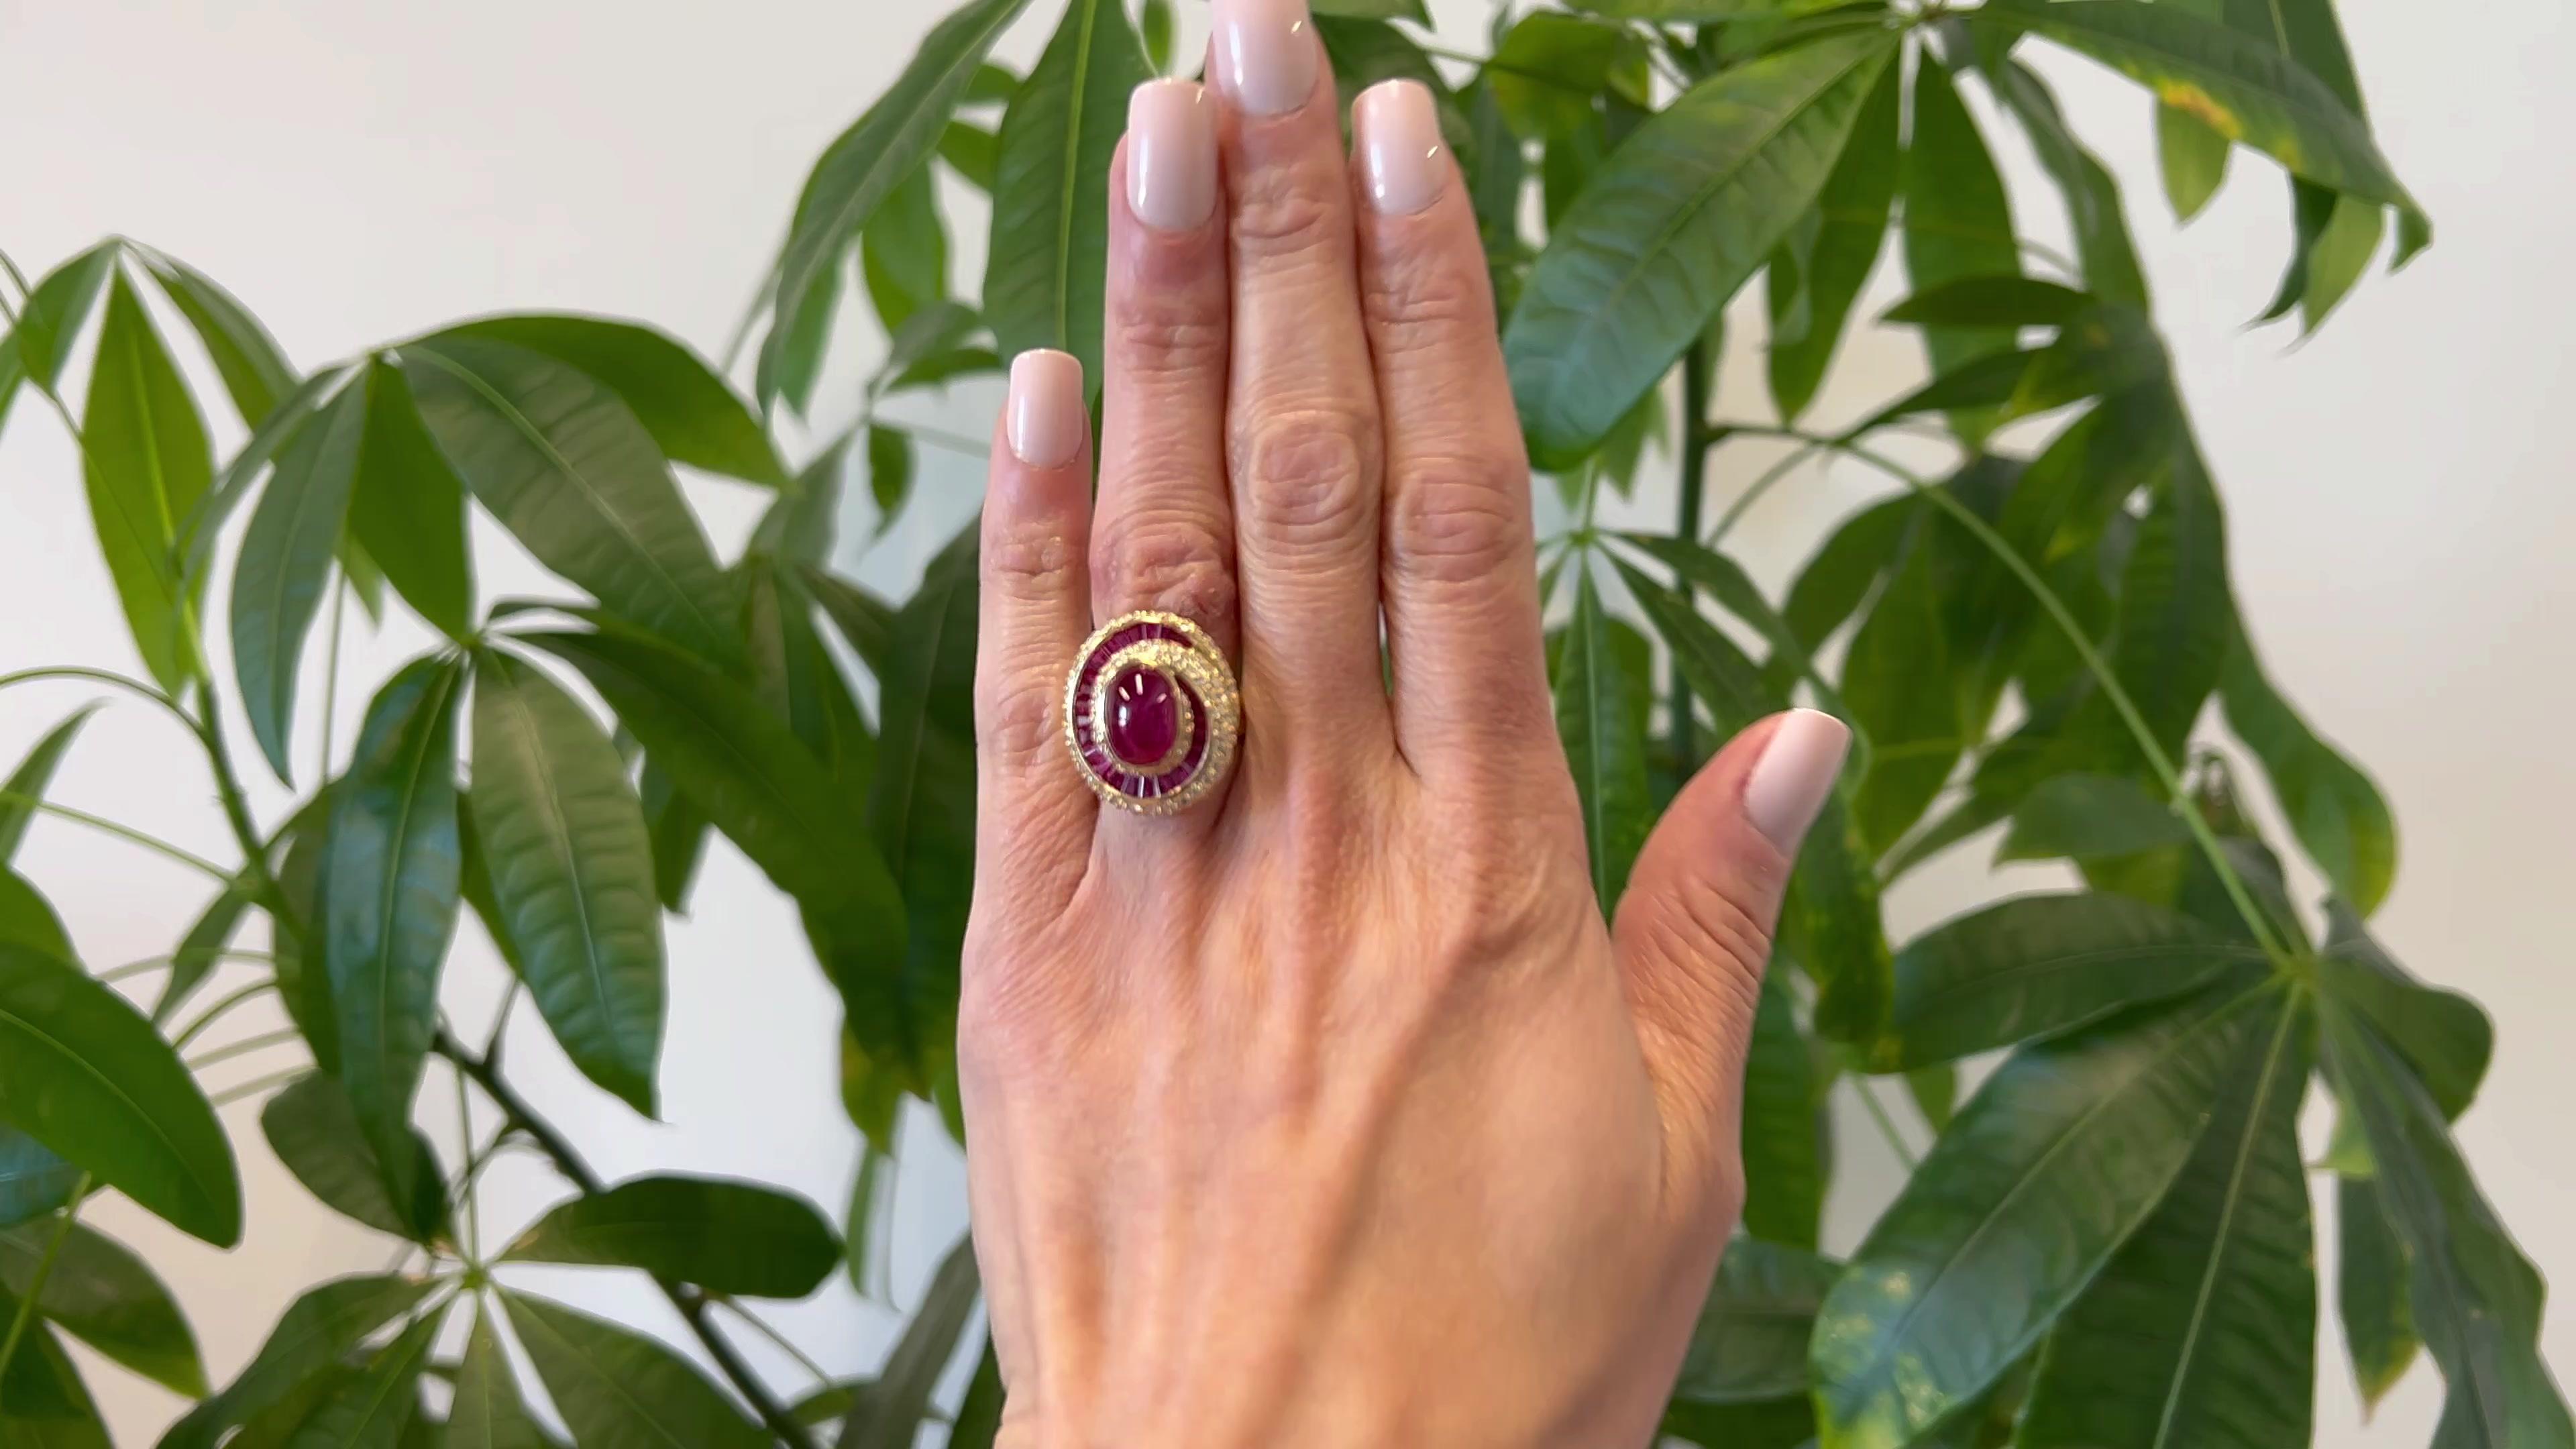 One Vintage 7.06 Carat Ruby and Diamond 18k Yellow Gold Swirl Cocktail Ring. Featuring one cabochon ruby of 7.06 carats. Accented by 26 rectangular step cut rubies with a total weight of 2.08 carats, and 112 round brilliant cut diamonds with a total